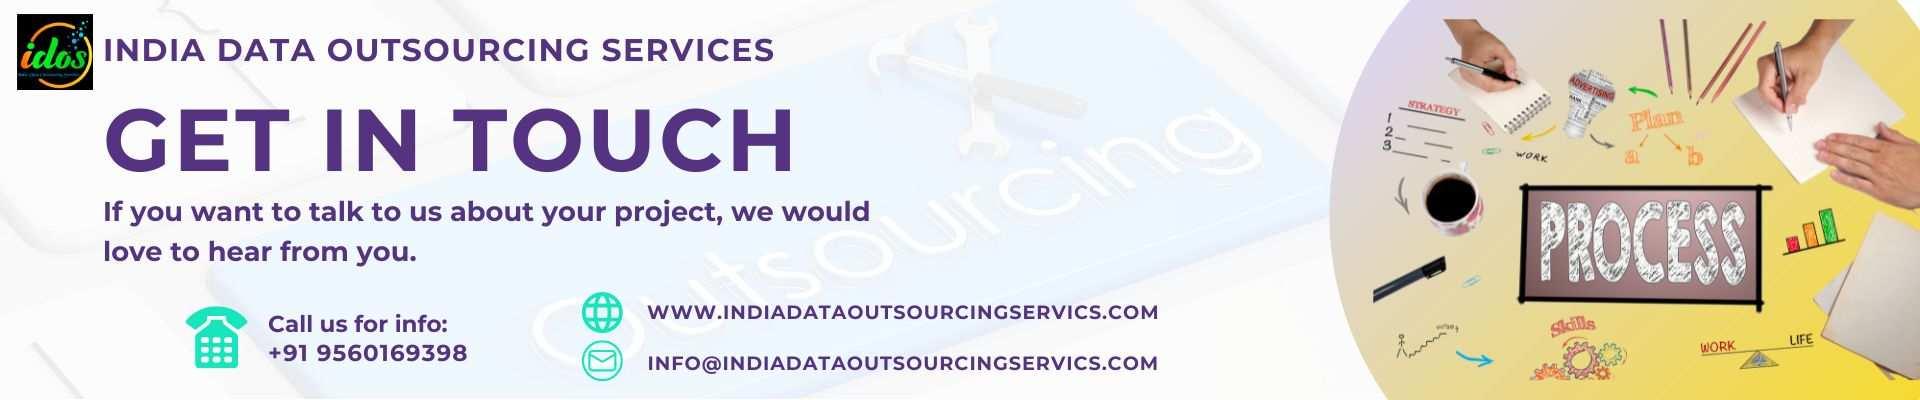 India Data Outsourcing Services deal with